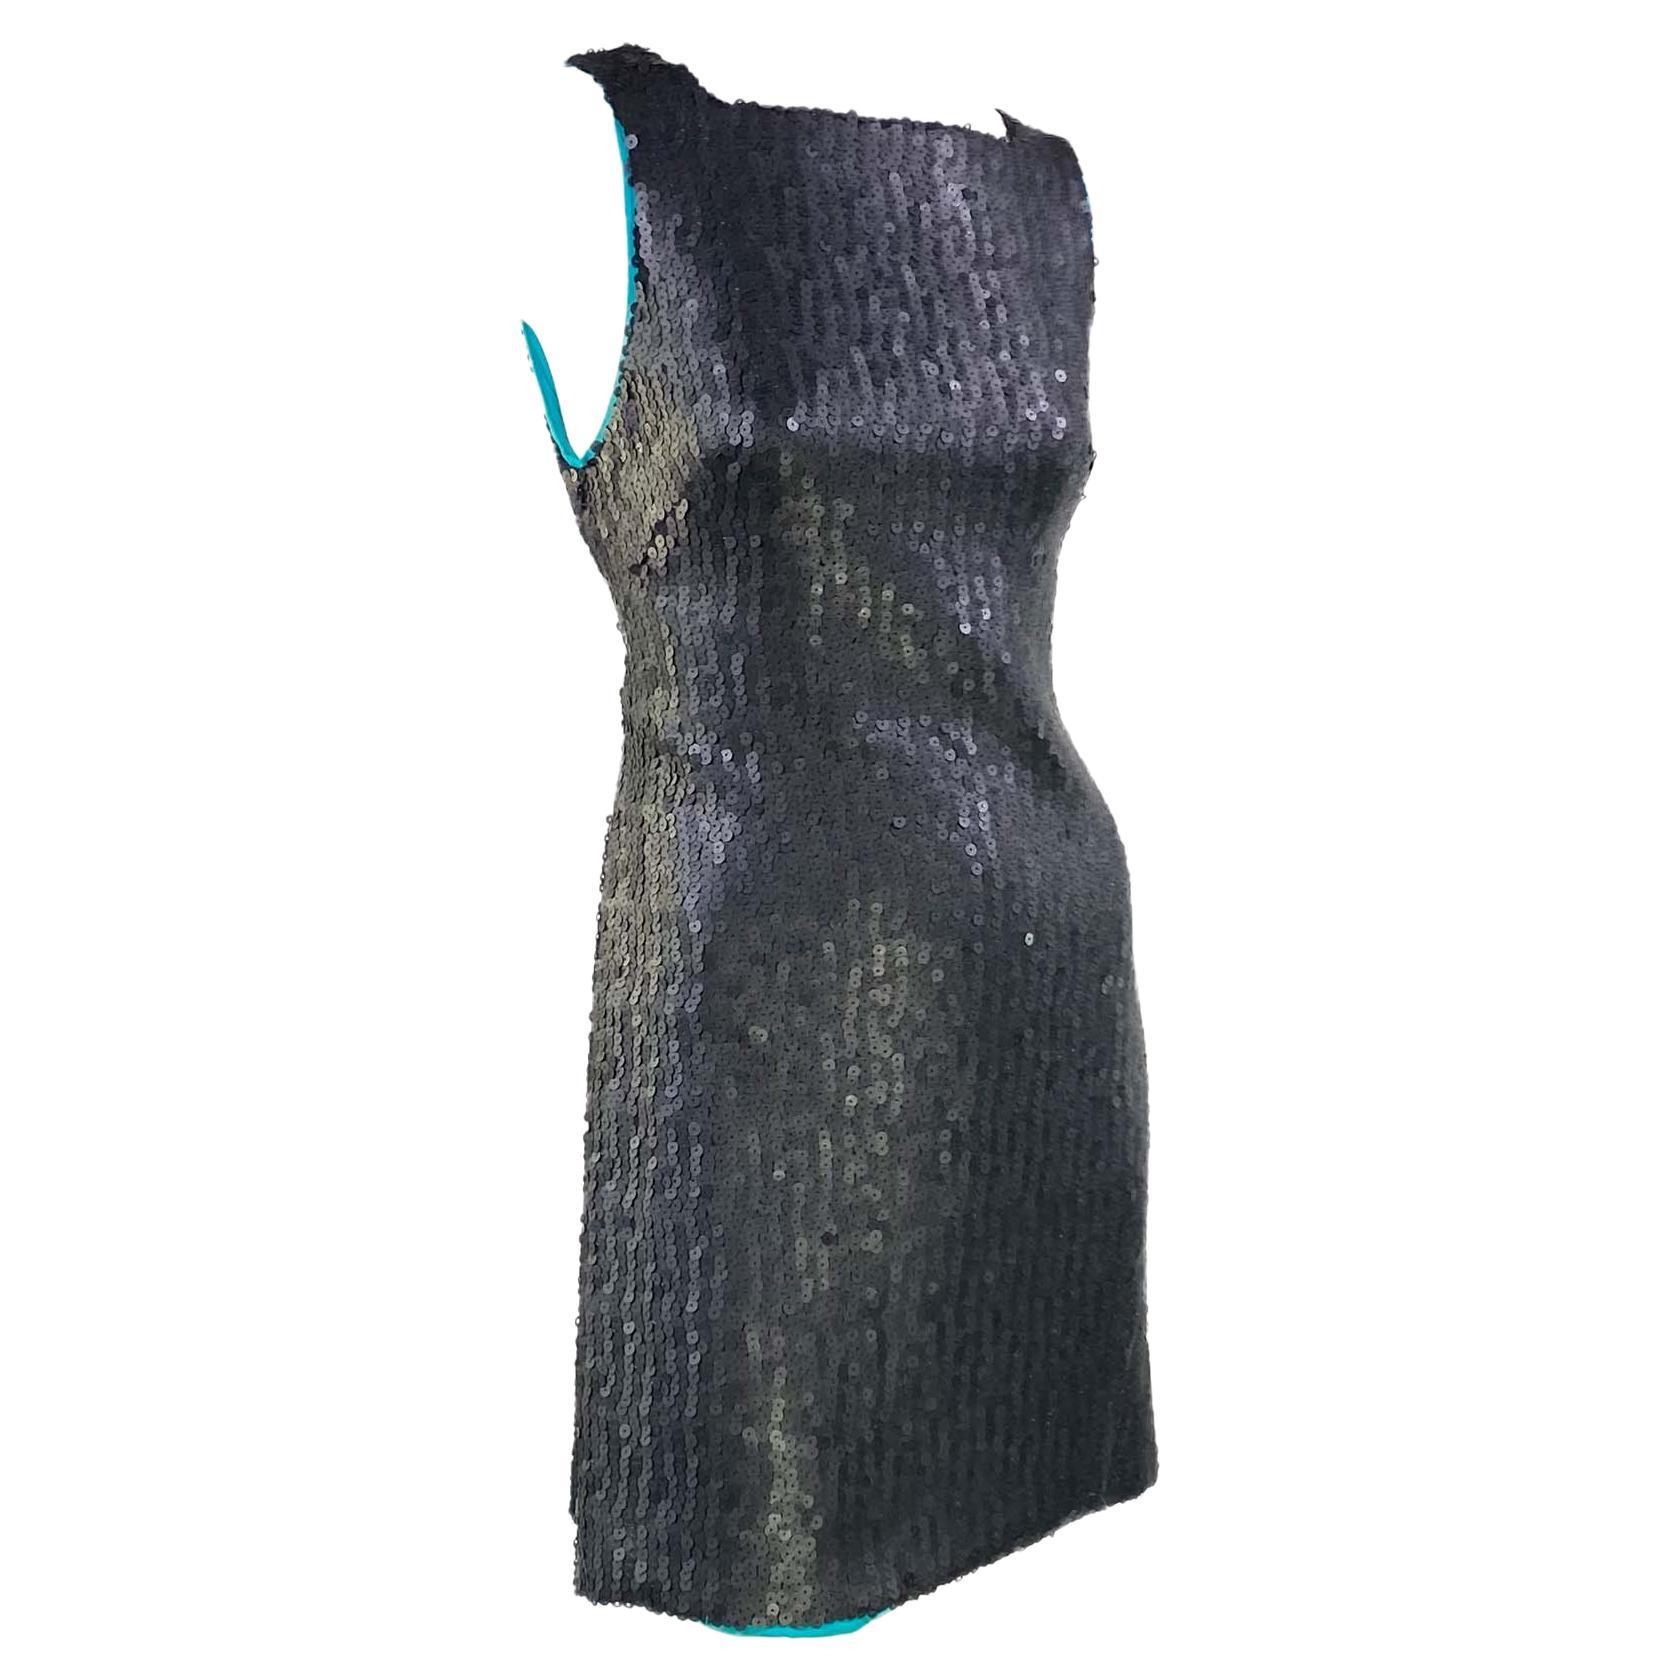 Women's F/W 1999 Gianni Versace by Donatella Matte Sequin Tunic Dress Teal Lining For Sale